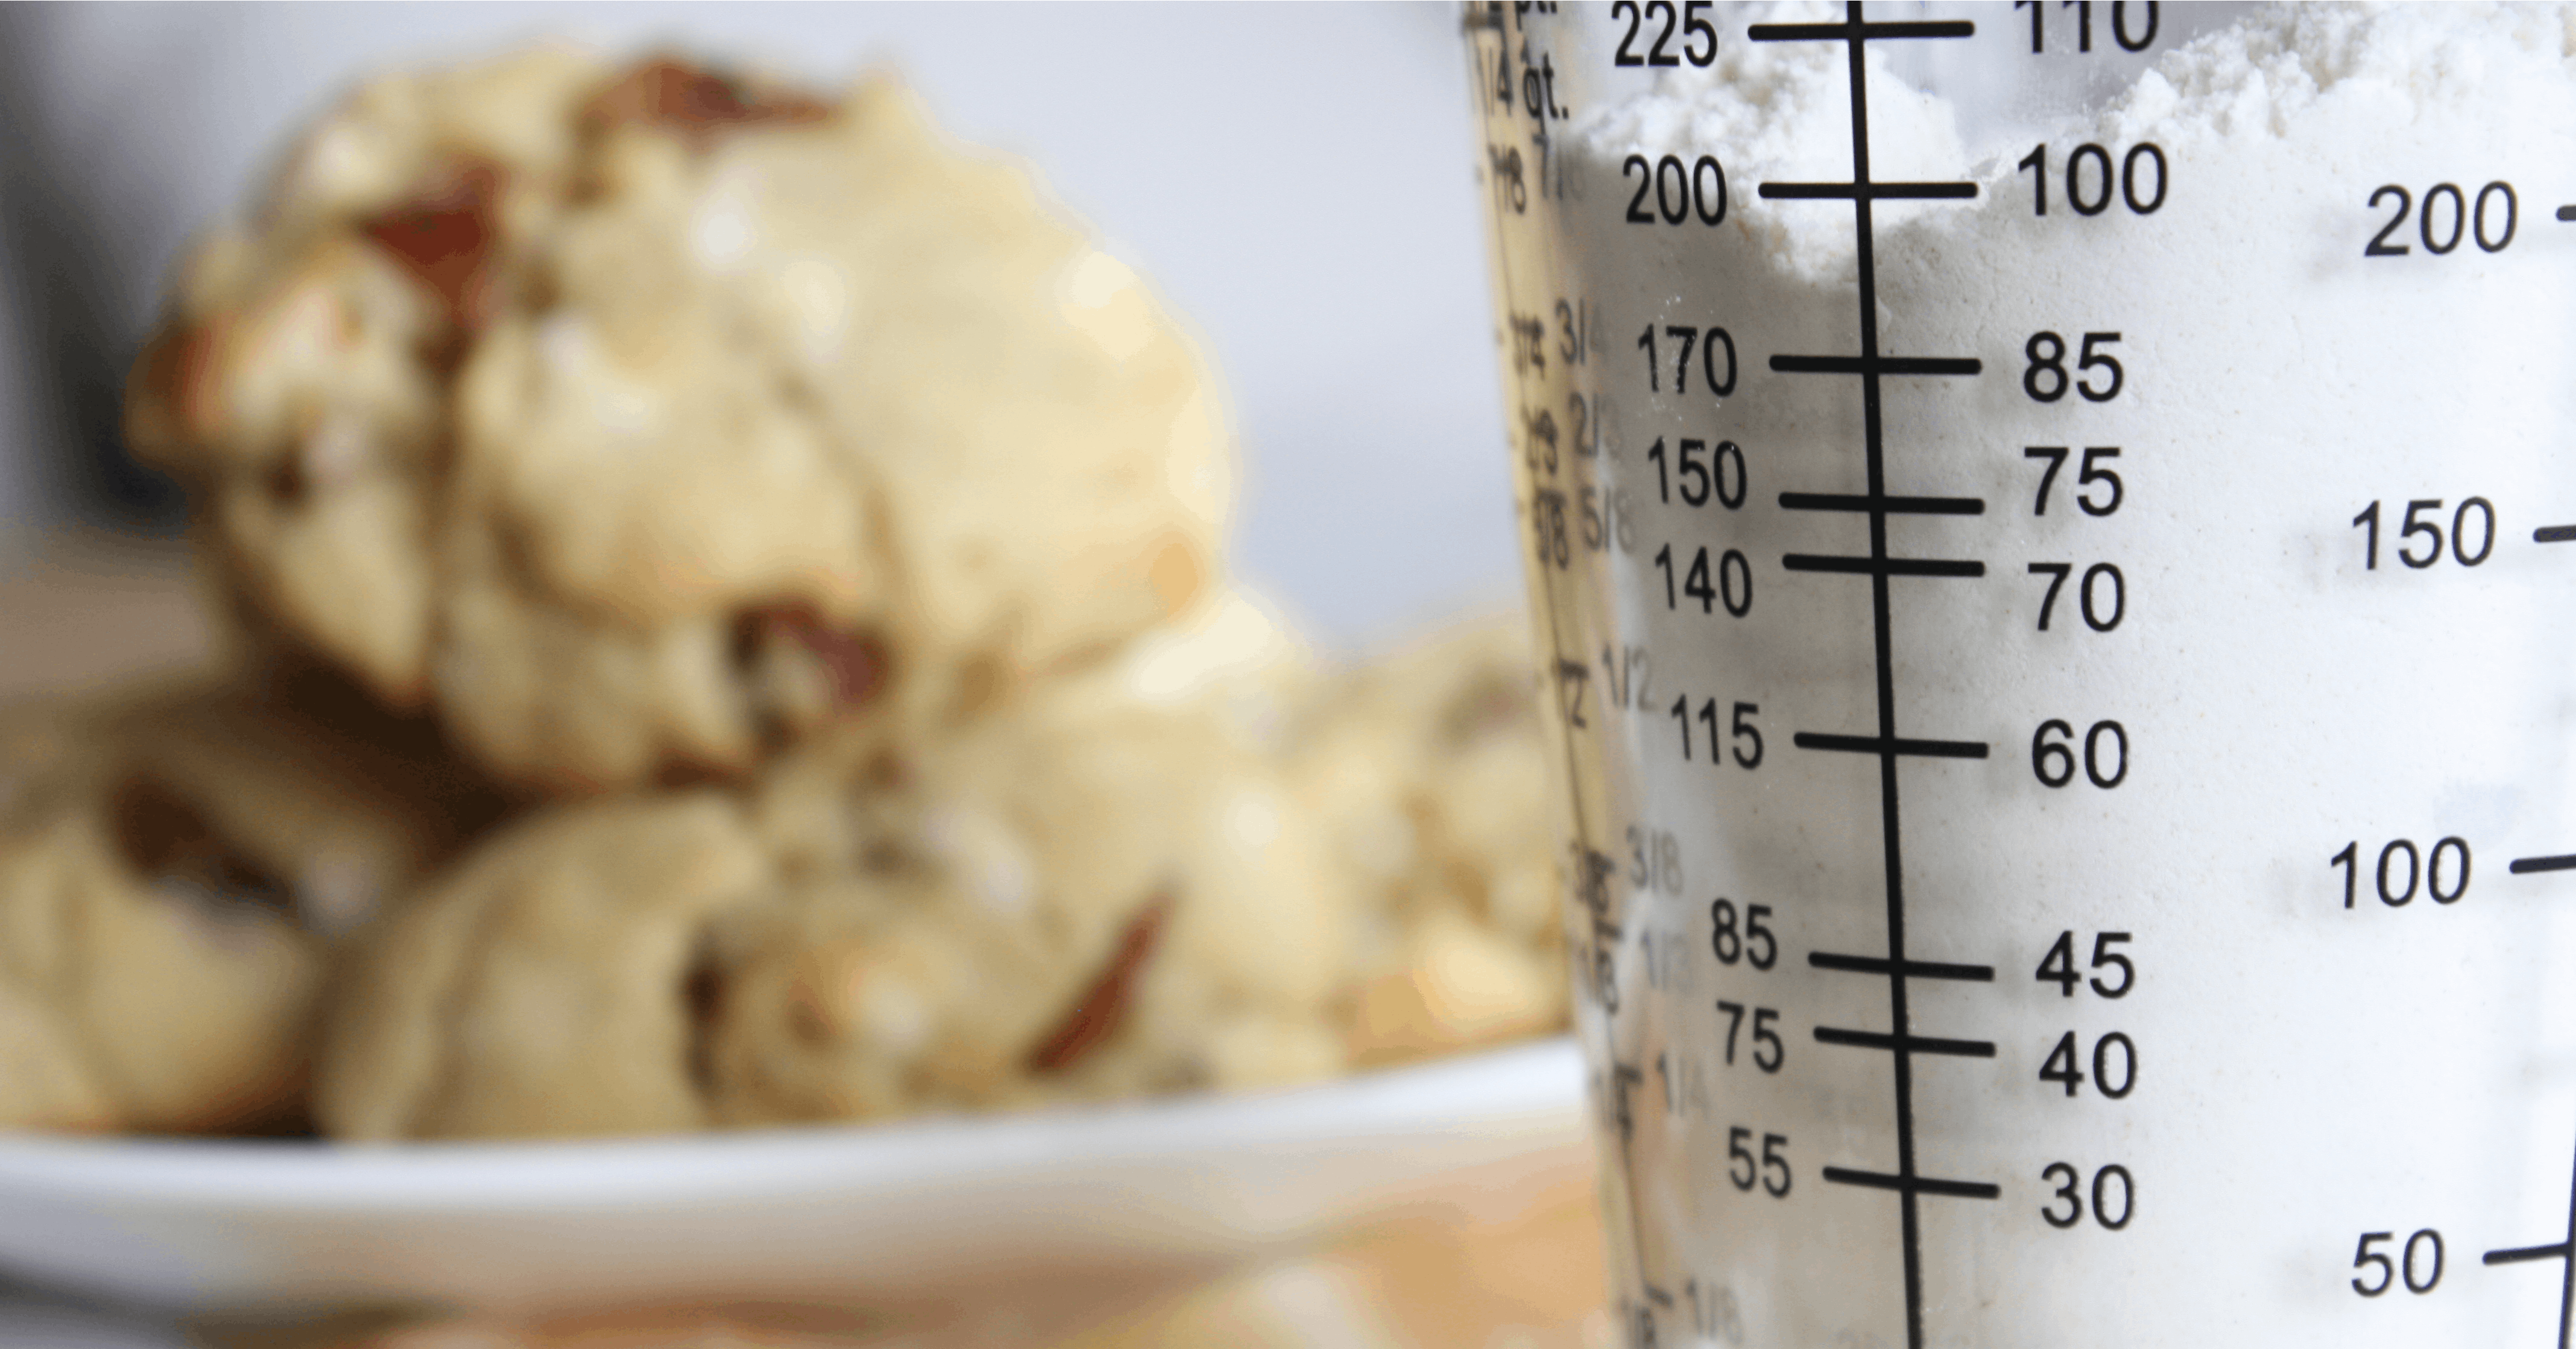 What is 100 grams in cups? · Cooking Measurements & Conversion ...